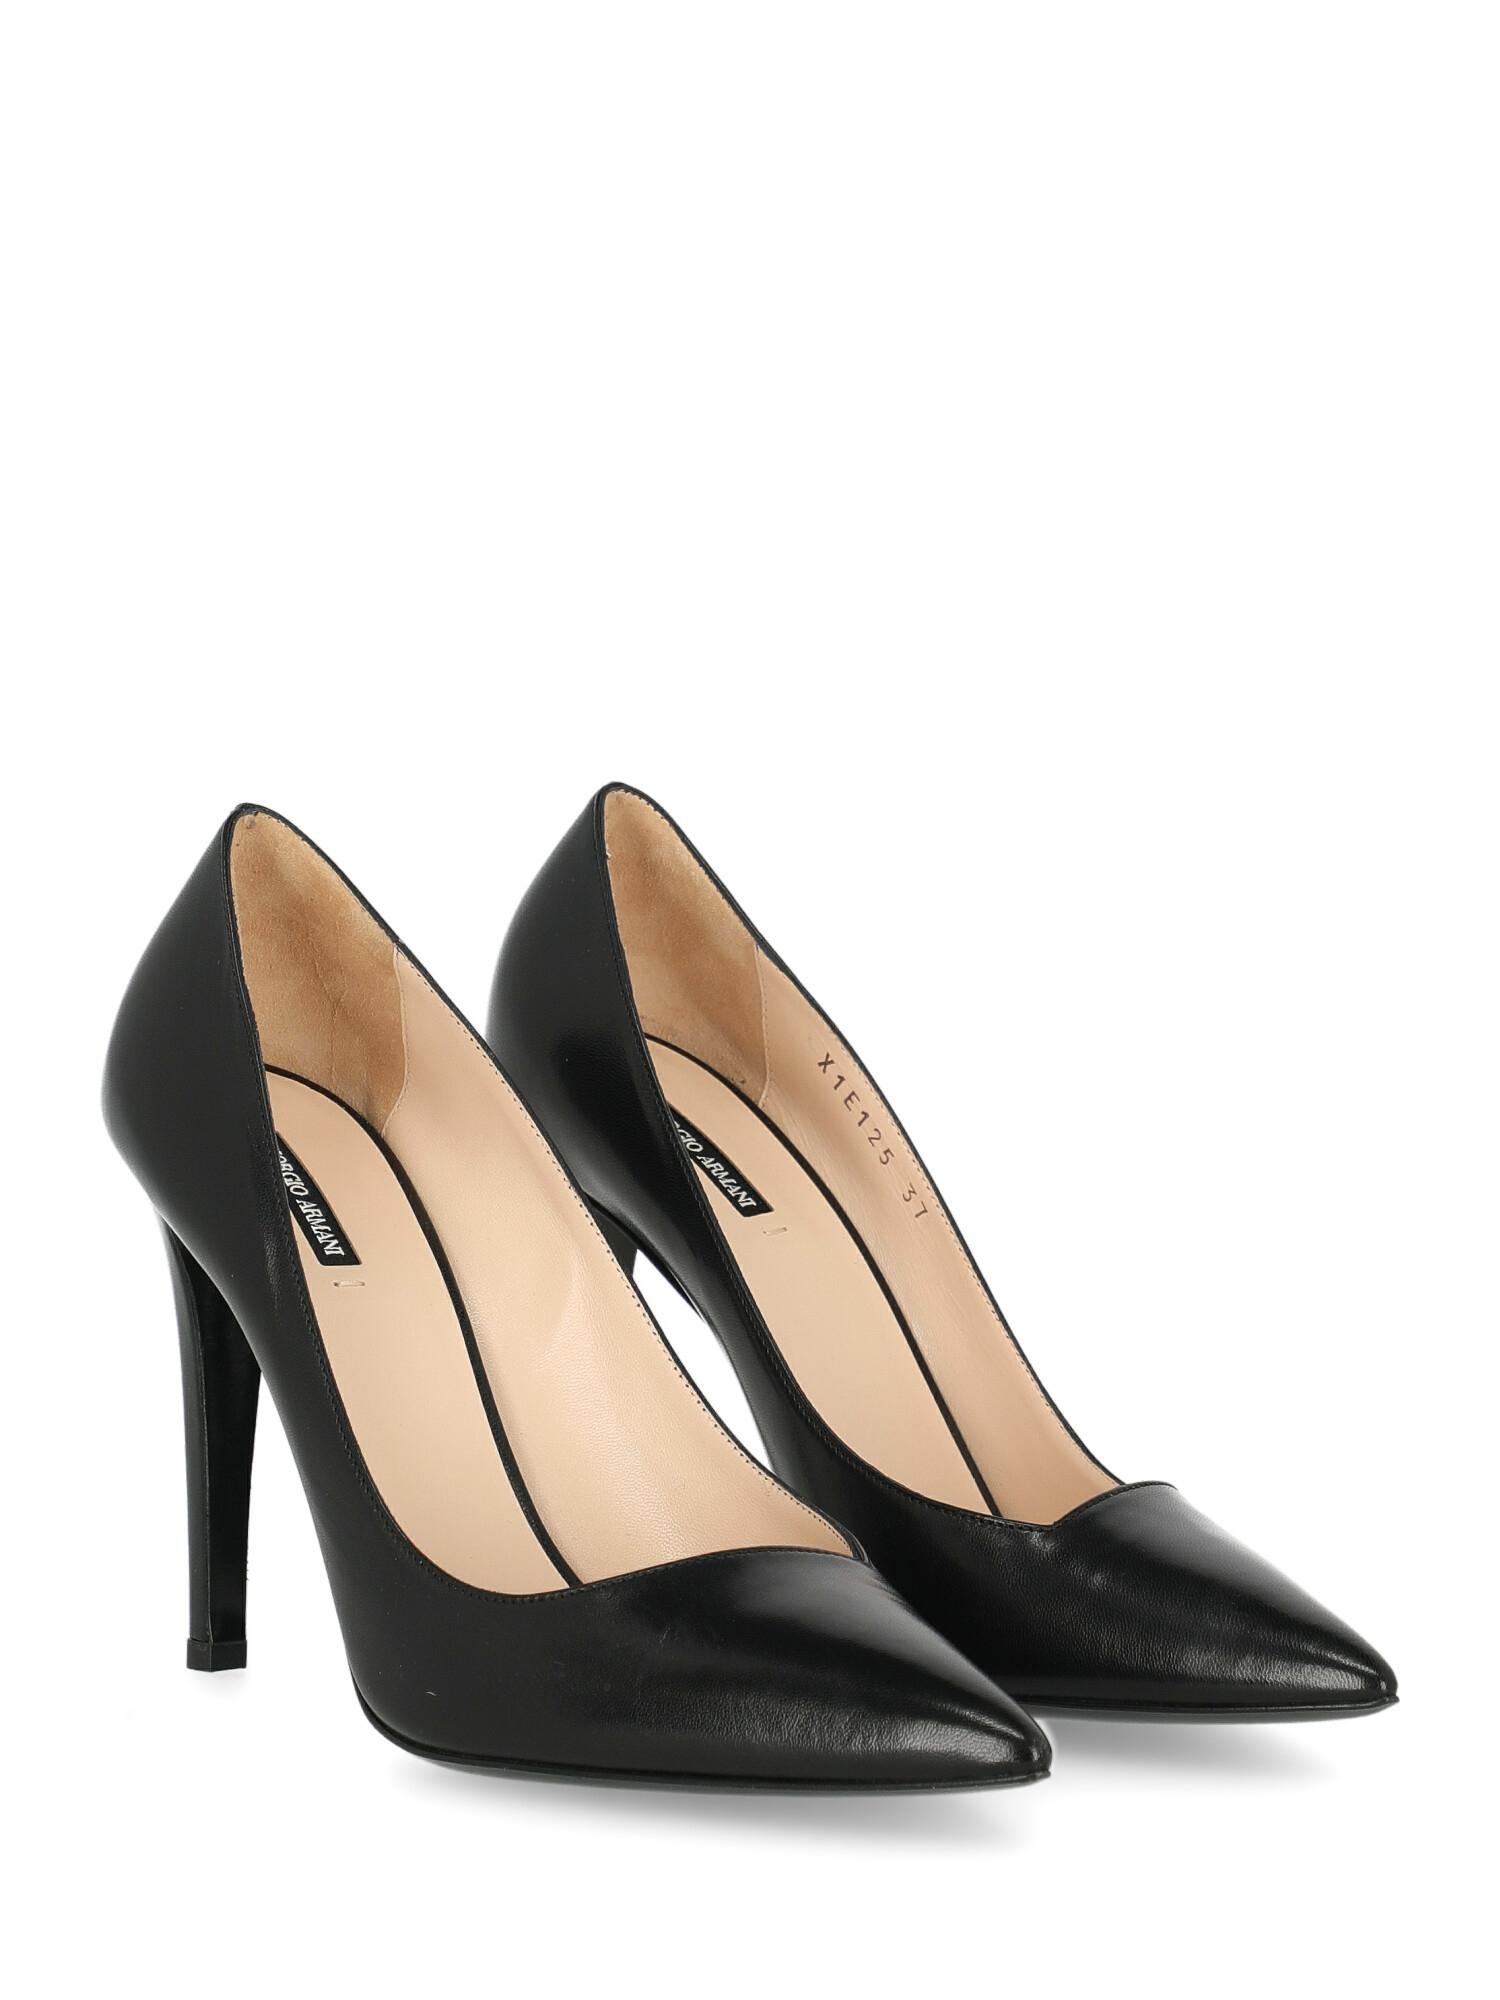 Woman, leather, solid color, internal logo, pointed toe, branded insole, tapered heel, high heel.

Includes:
- Dust bag
- Box
- Heel tip replacement

Product Condition: Excellent
Sole: negligible marks.

Measurements:
Heel height: 11